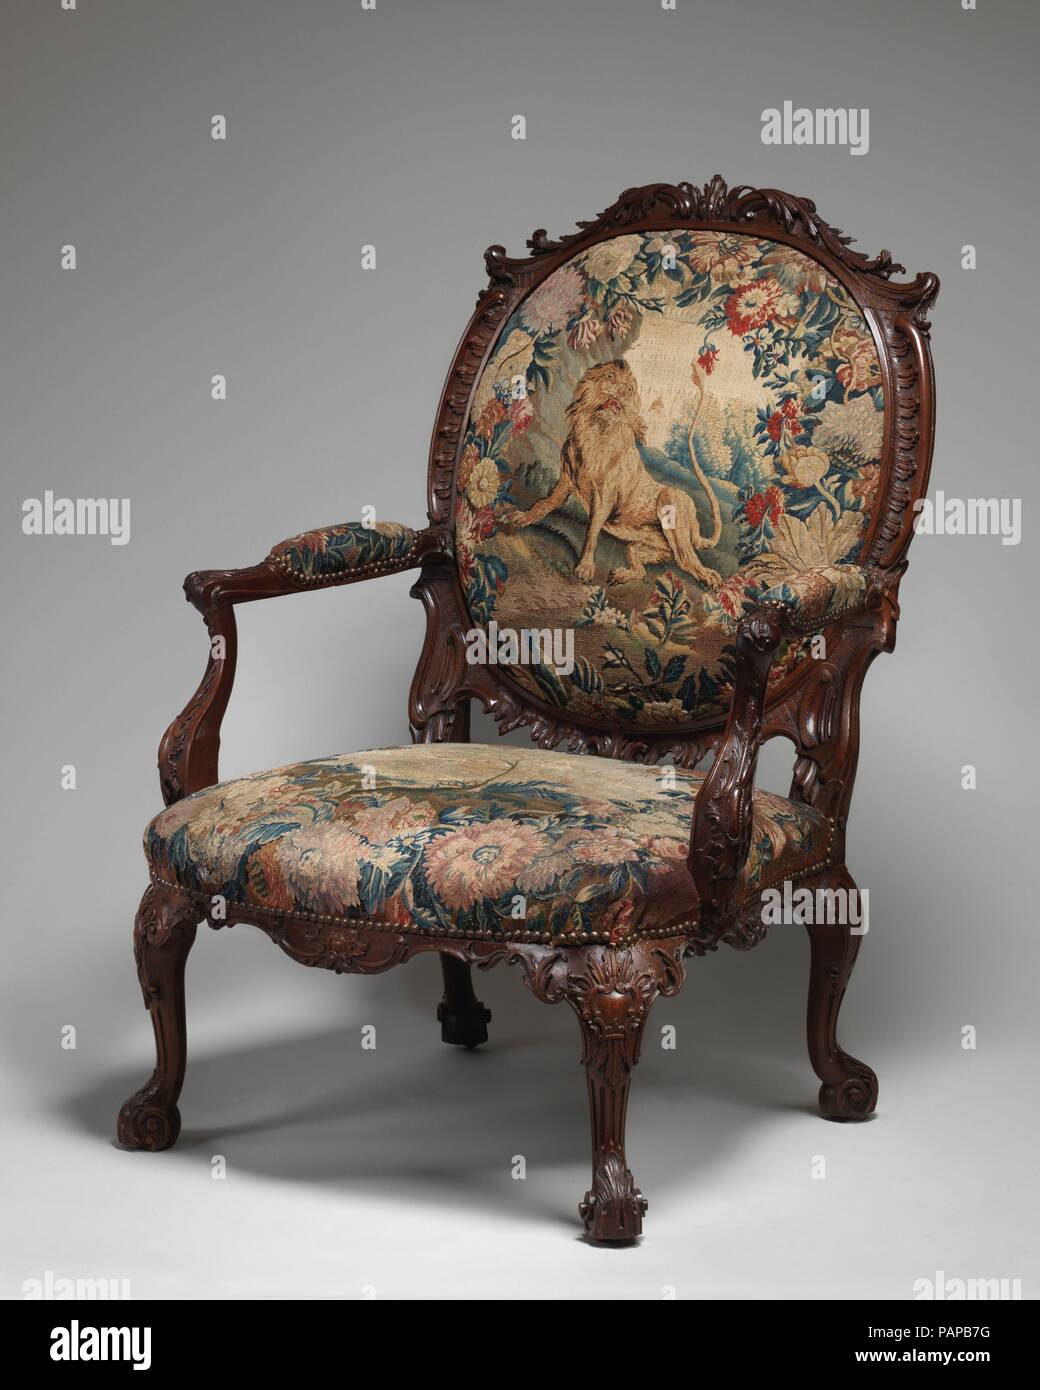 Armchair (one of four). Culture: British and French, probably Beauvais. Dimensions: Overall: 44 × 32 × 28 in. (111.8 × 81.3 × 71.1 cm). Factory: Tapestry probably woven at Royal Manufactory Beauvais 1664-1789. Date: 1755-65.  These chairs are from a set of six armchairs and two settees supplied to the third Duke of Ancaster (1714-1778) for Grimsthorpe Castle, Lincolnshire. The set was originally partially gilt and upholstered with Gobelins coverings (now Rijksmuseum, Amsterdam) after designs by Francois Boucher. The present coverings were applied between 1934 and 1858. Museum: Metropolitan Mus Stock Photo